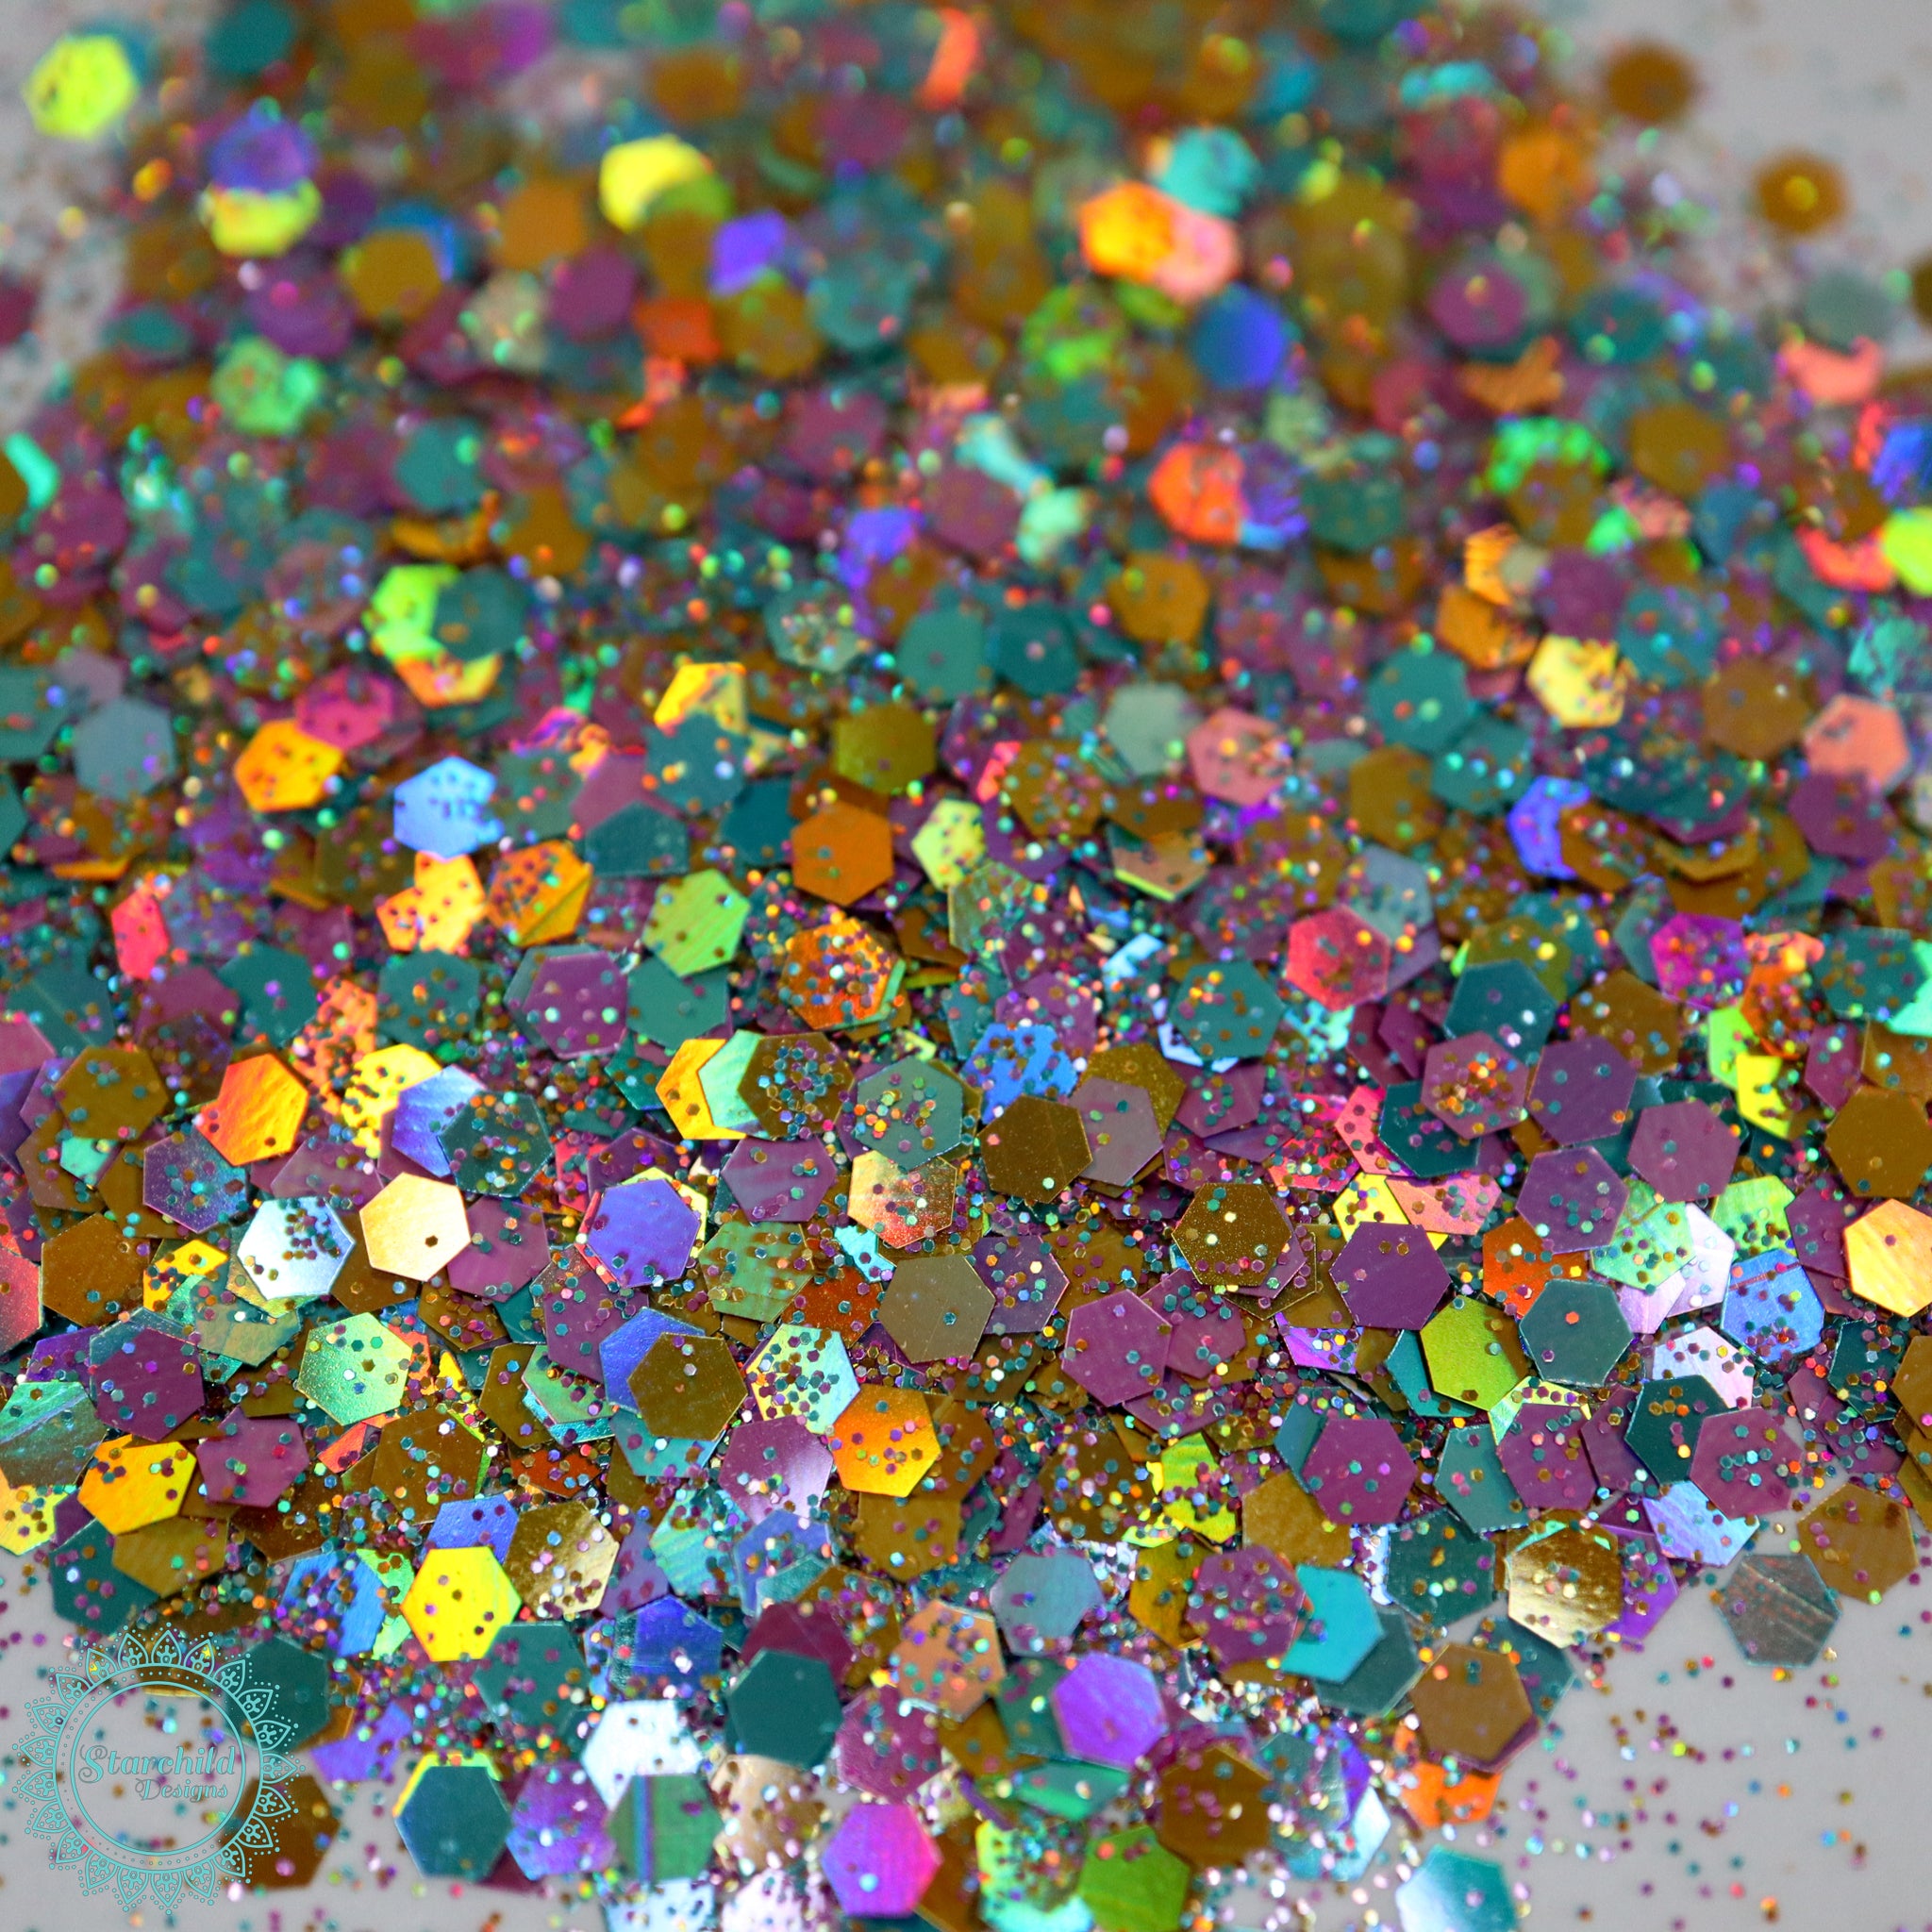 Gold Mix Hologram Chunky glitter for Resin crafts, Glitter for